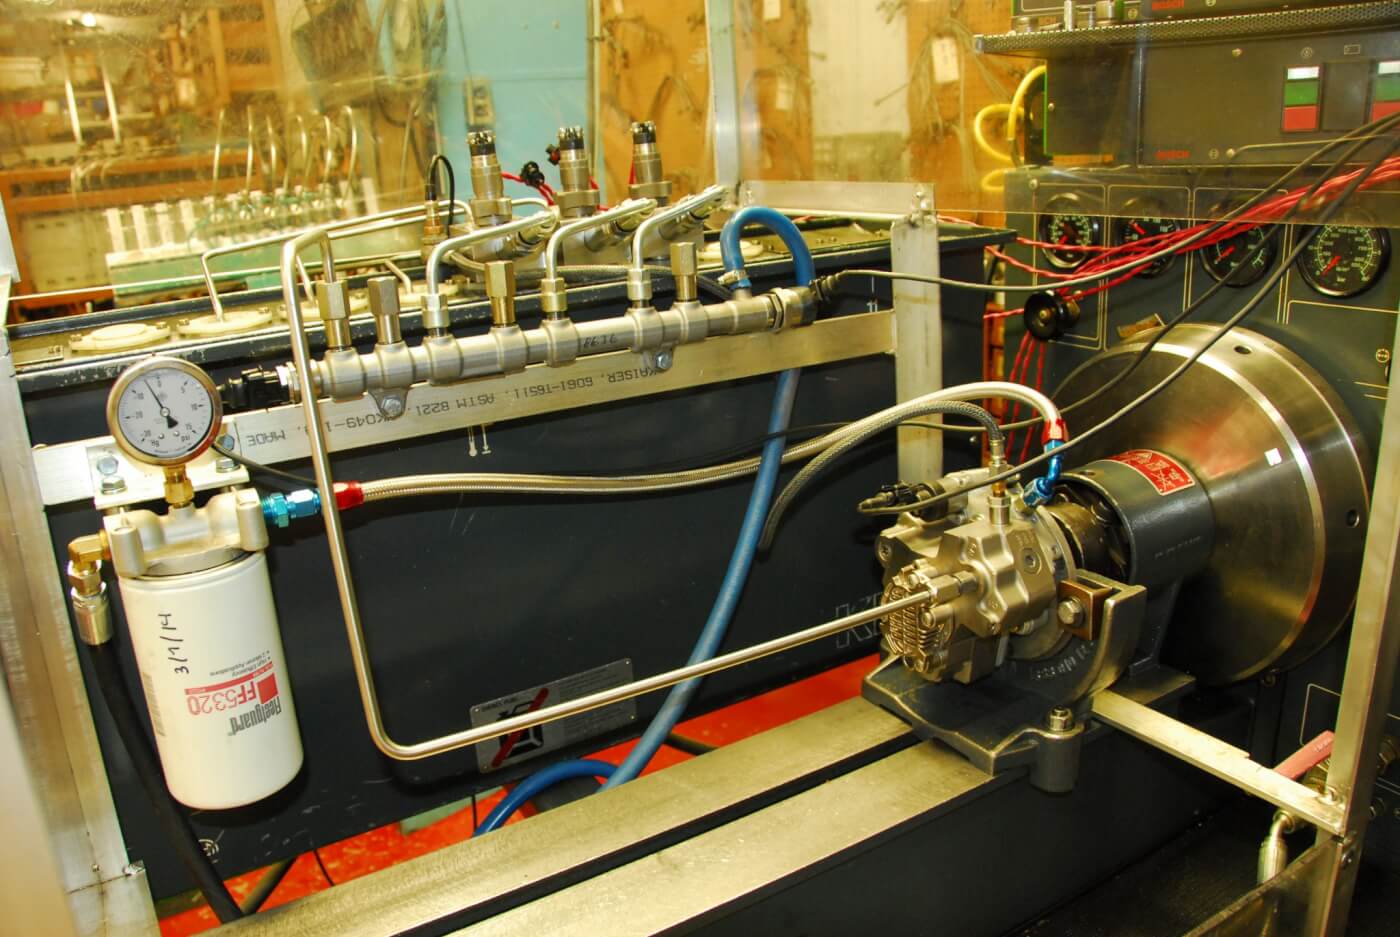 Scheid’s test cell evaluates the flow accuracy of a CP3 pump and common rail injectors. It evaluates the pump’s rpm and has a common rail attached with sensors, so the pulse width can be adjusted to three or four fuel set points.